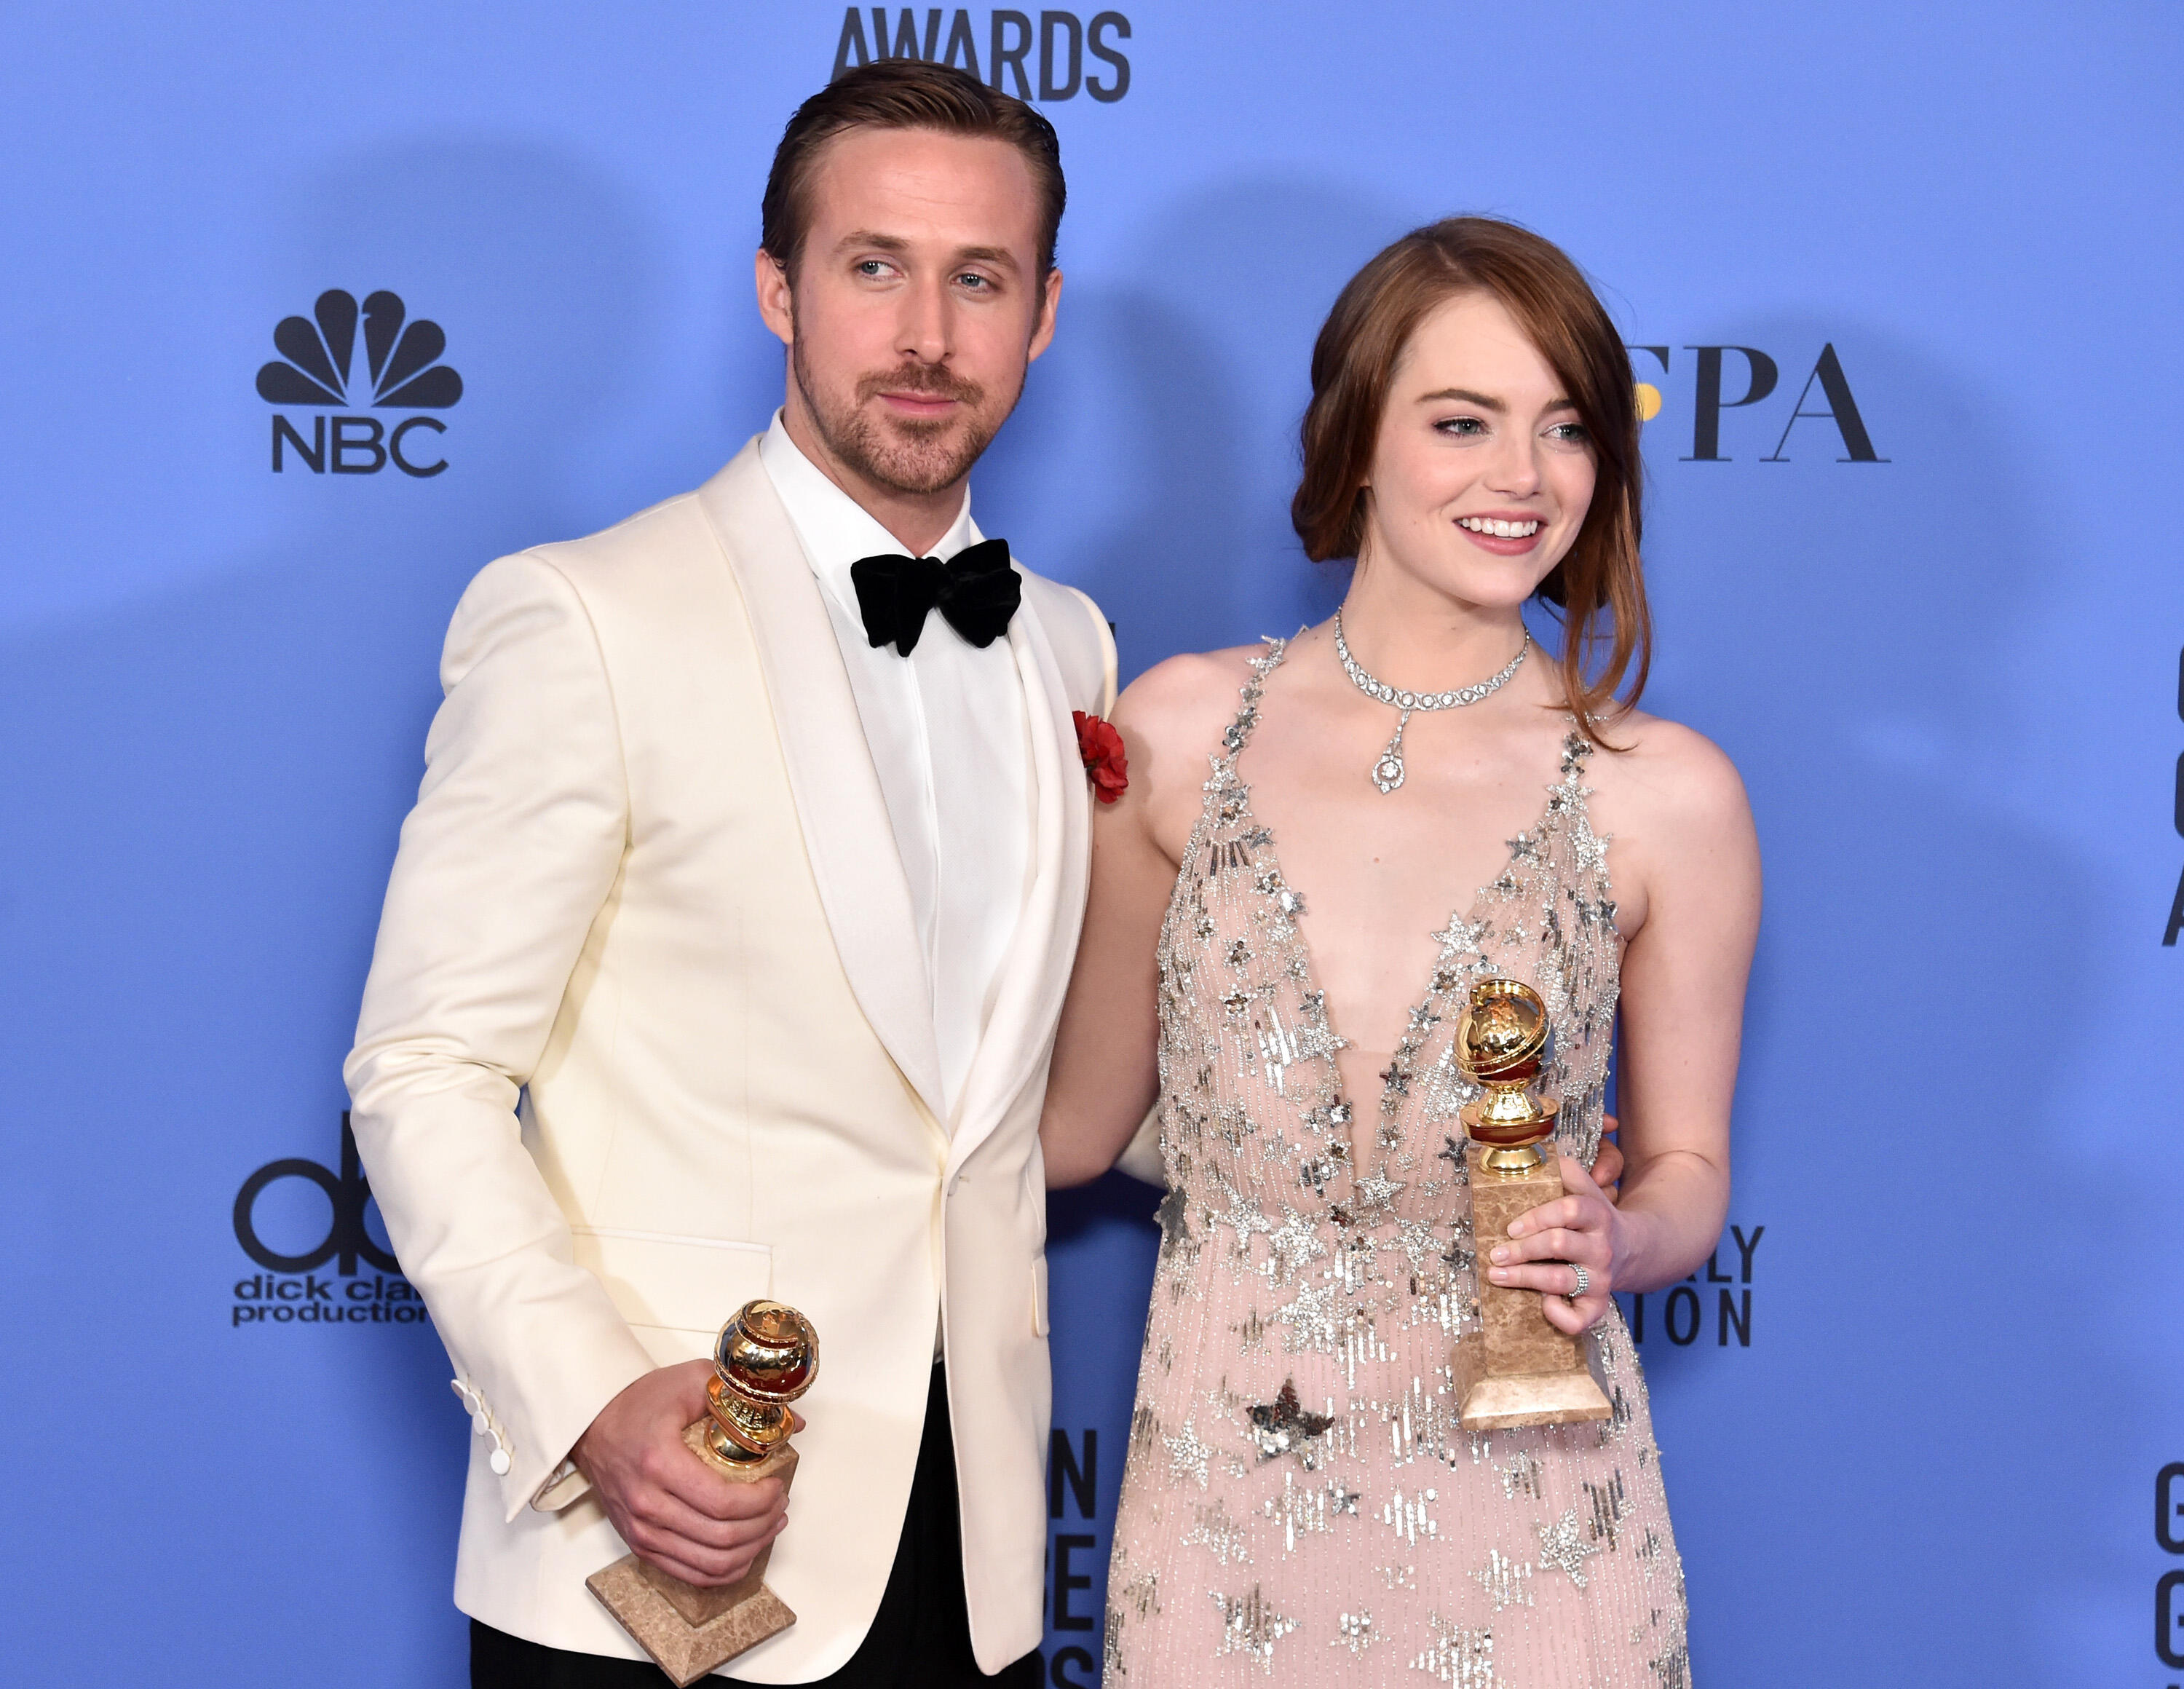 BEVERLY HILLS, CA - JANUARY 08:  Actor Ryan Gosling (L) and actress Emma Stone pose in the press room during the 74th Annual Golden Globe Awards at The Beverly Hilton Hotel on January 8, 2017 in Beverly Hills, California.  (Photo by Alberto E. Rodriguez/G